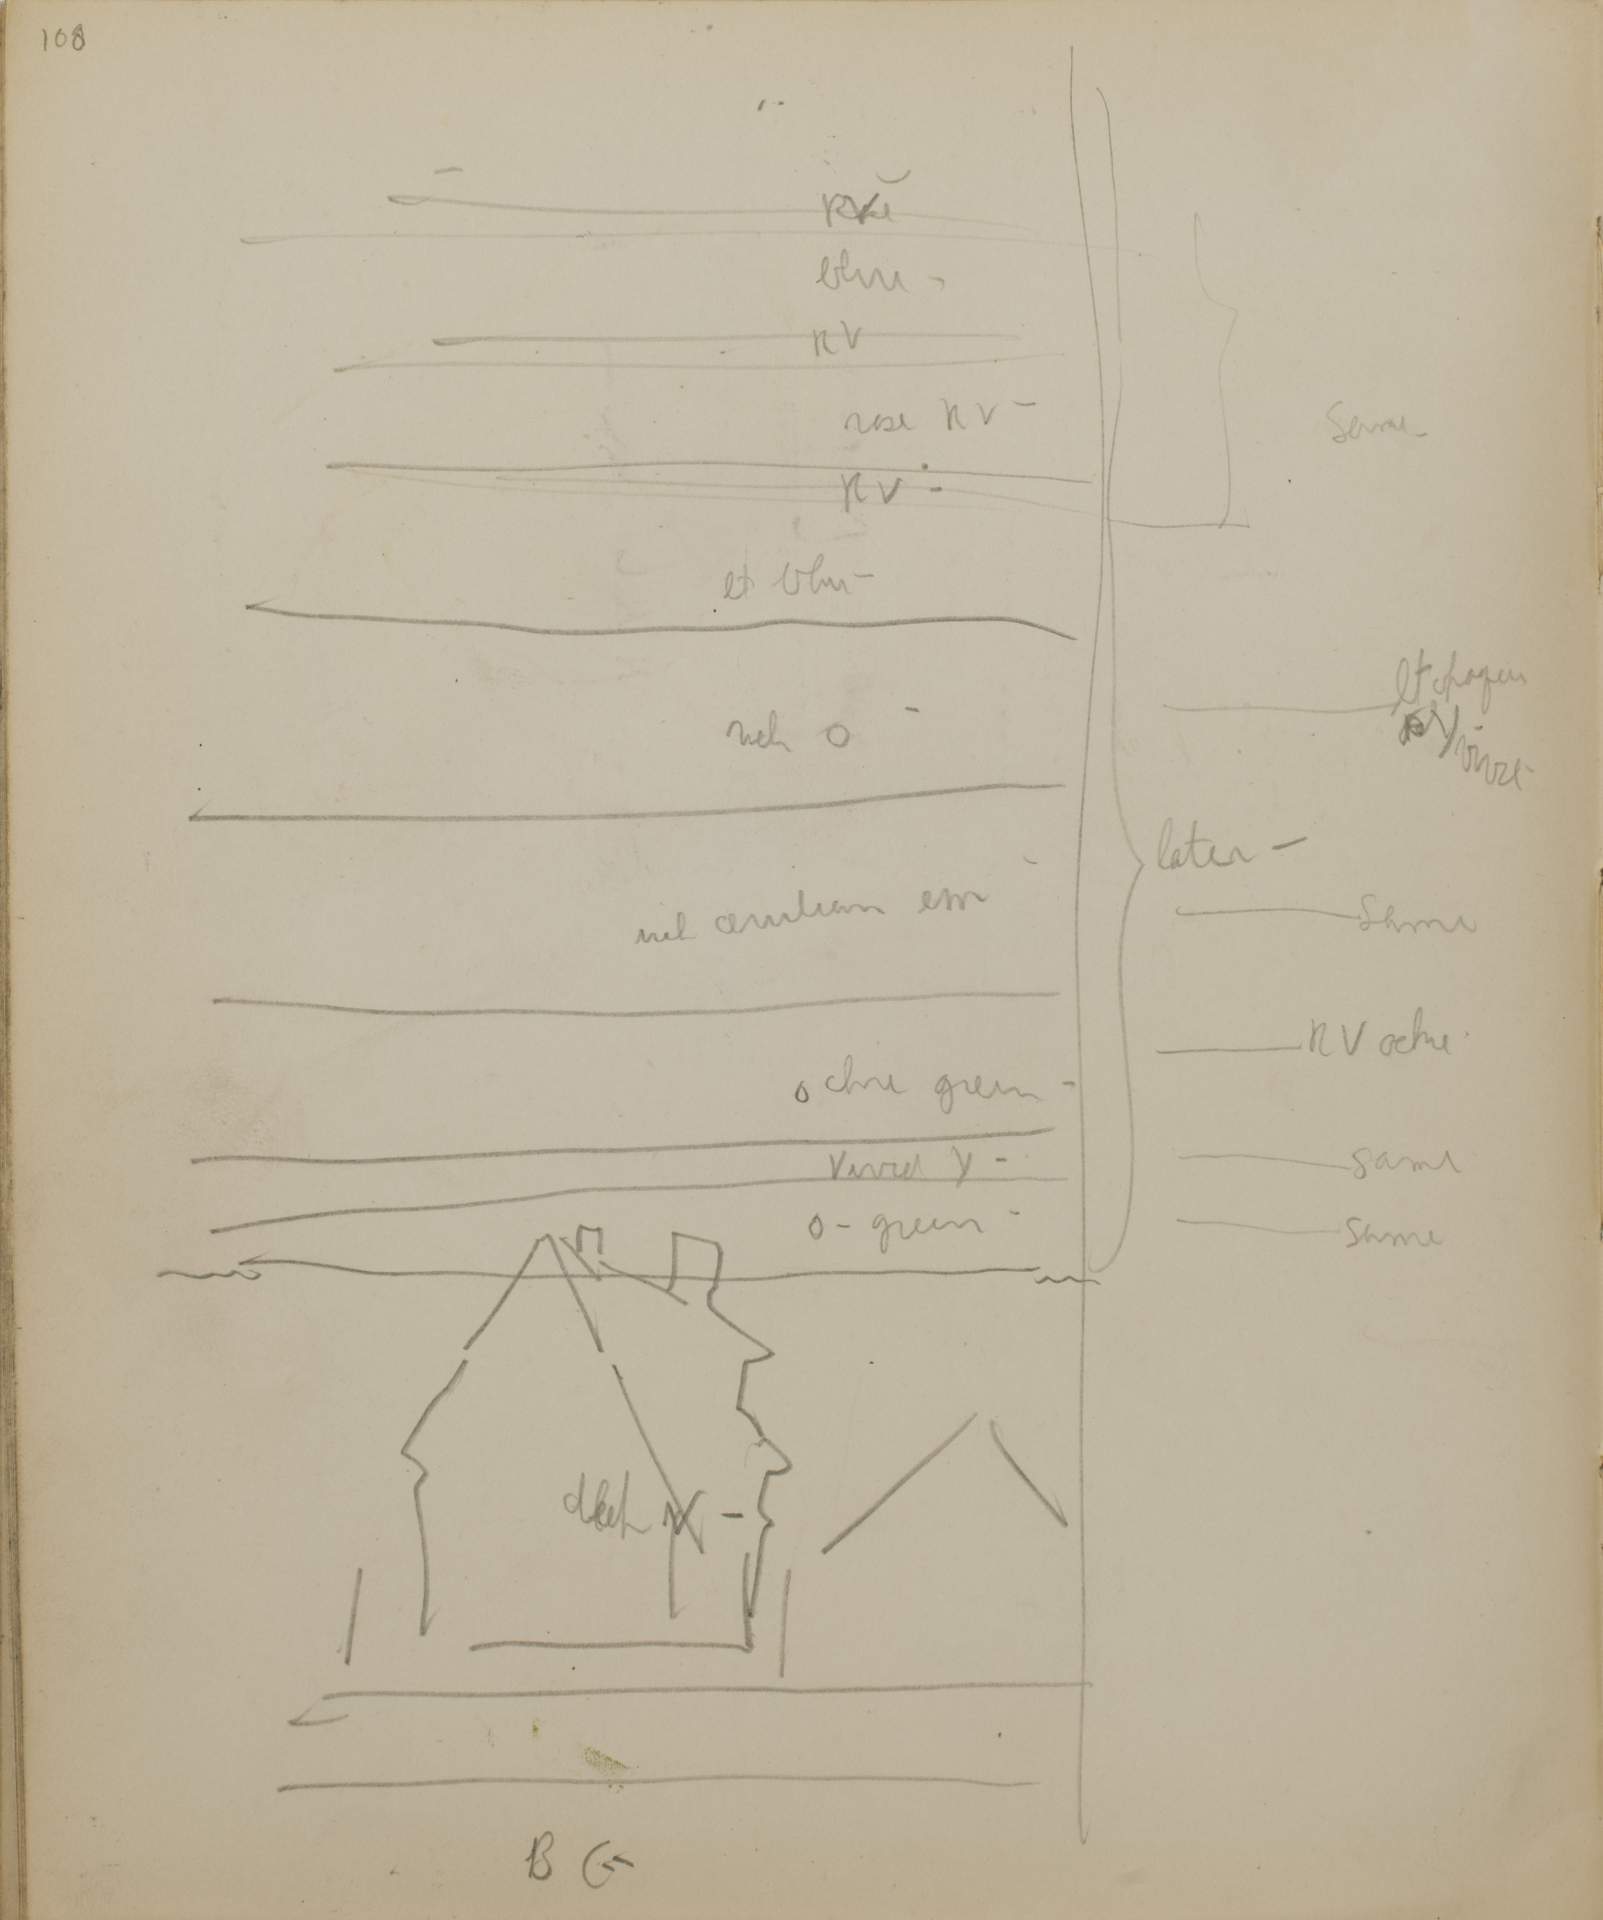 Untitled (sketch of house and sky)